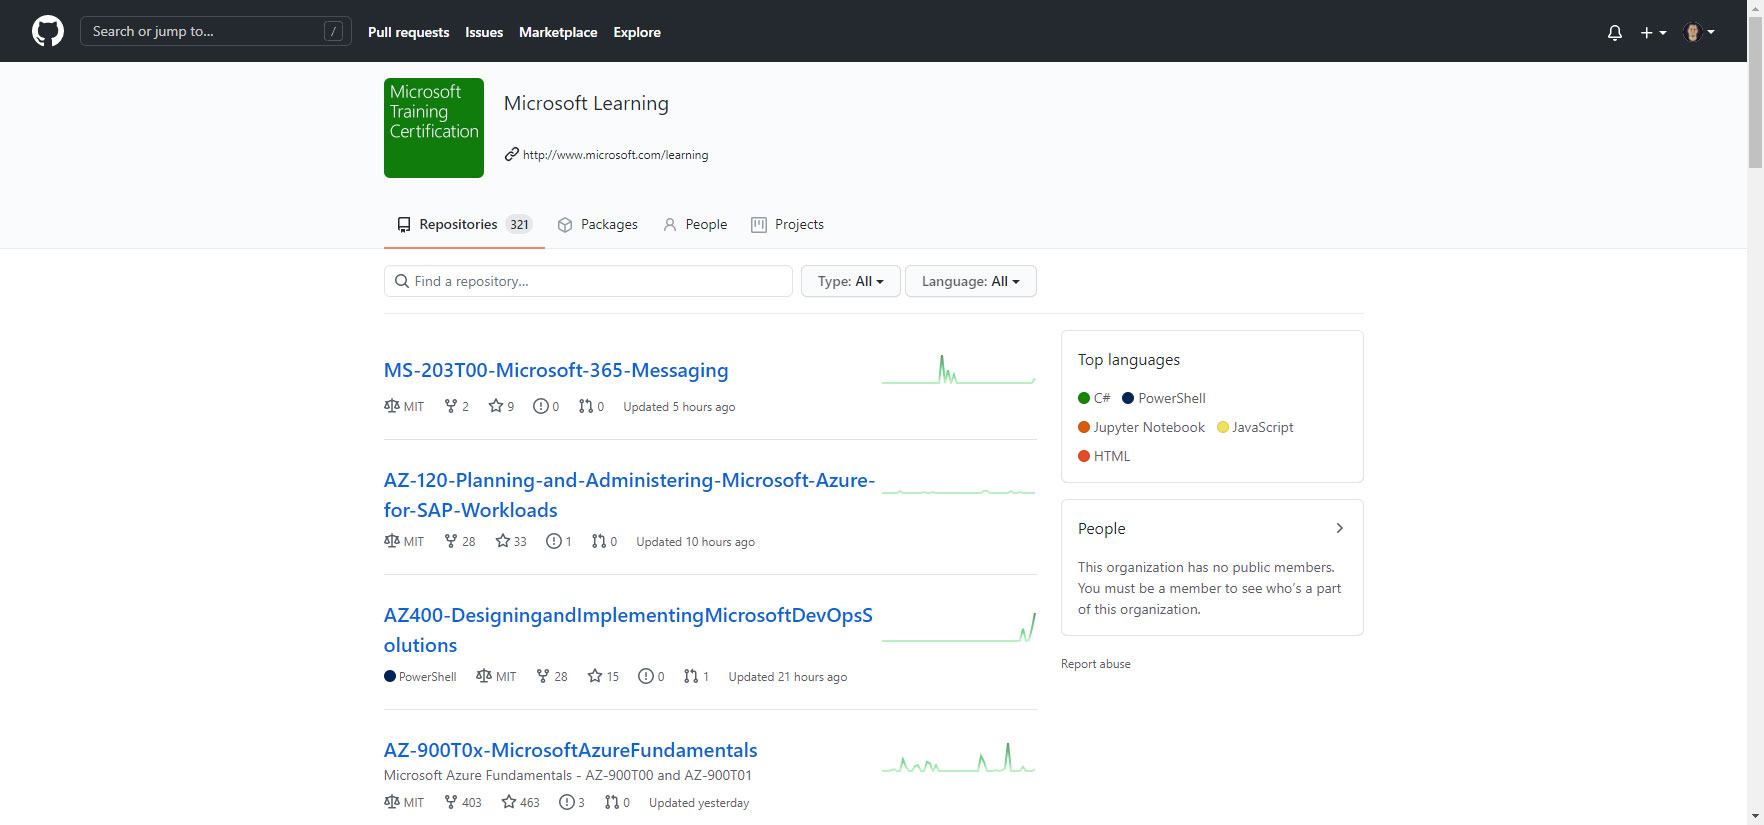 Are you preparing for Microsoft Certifications? Check Microsoft Learning Github profile!